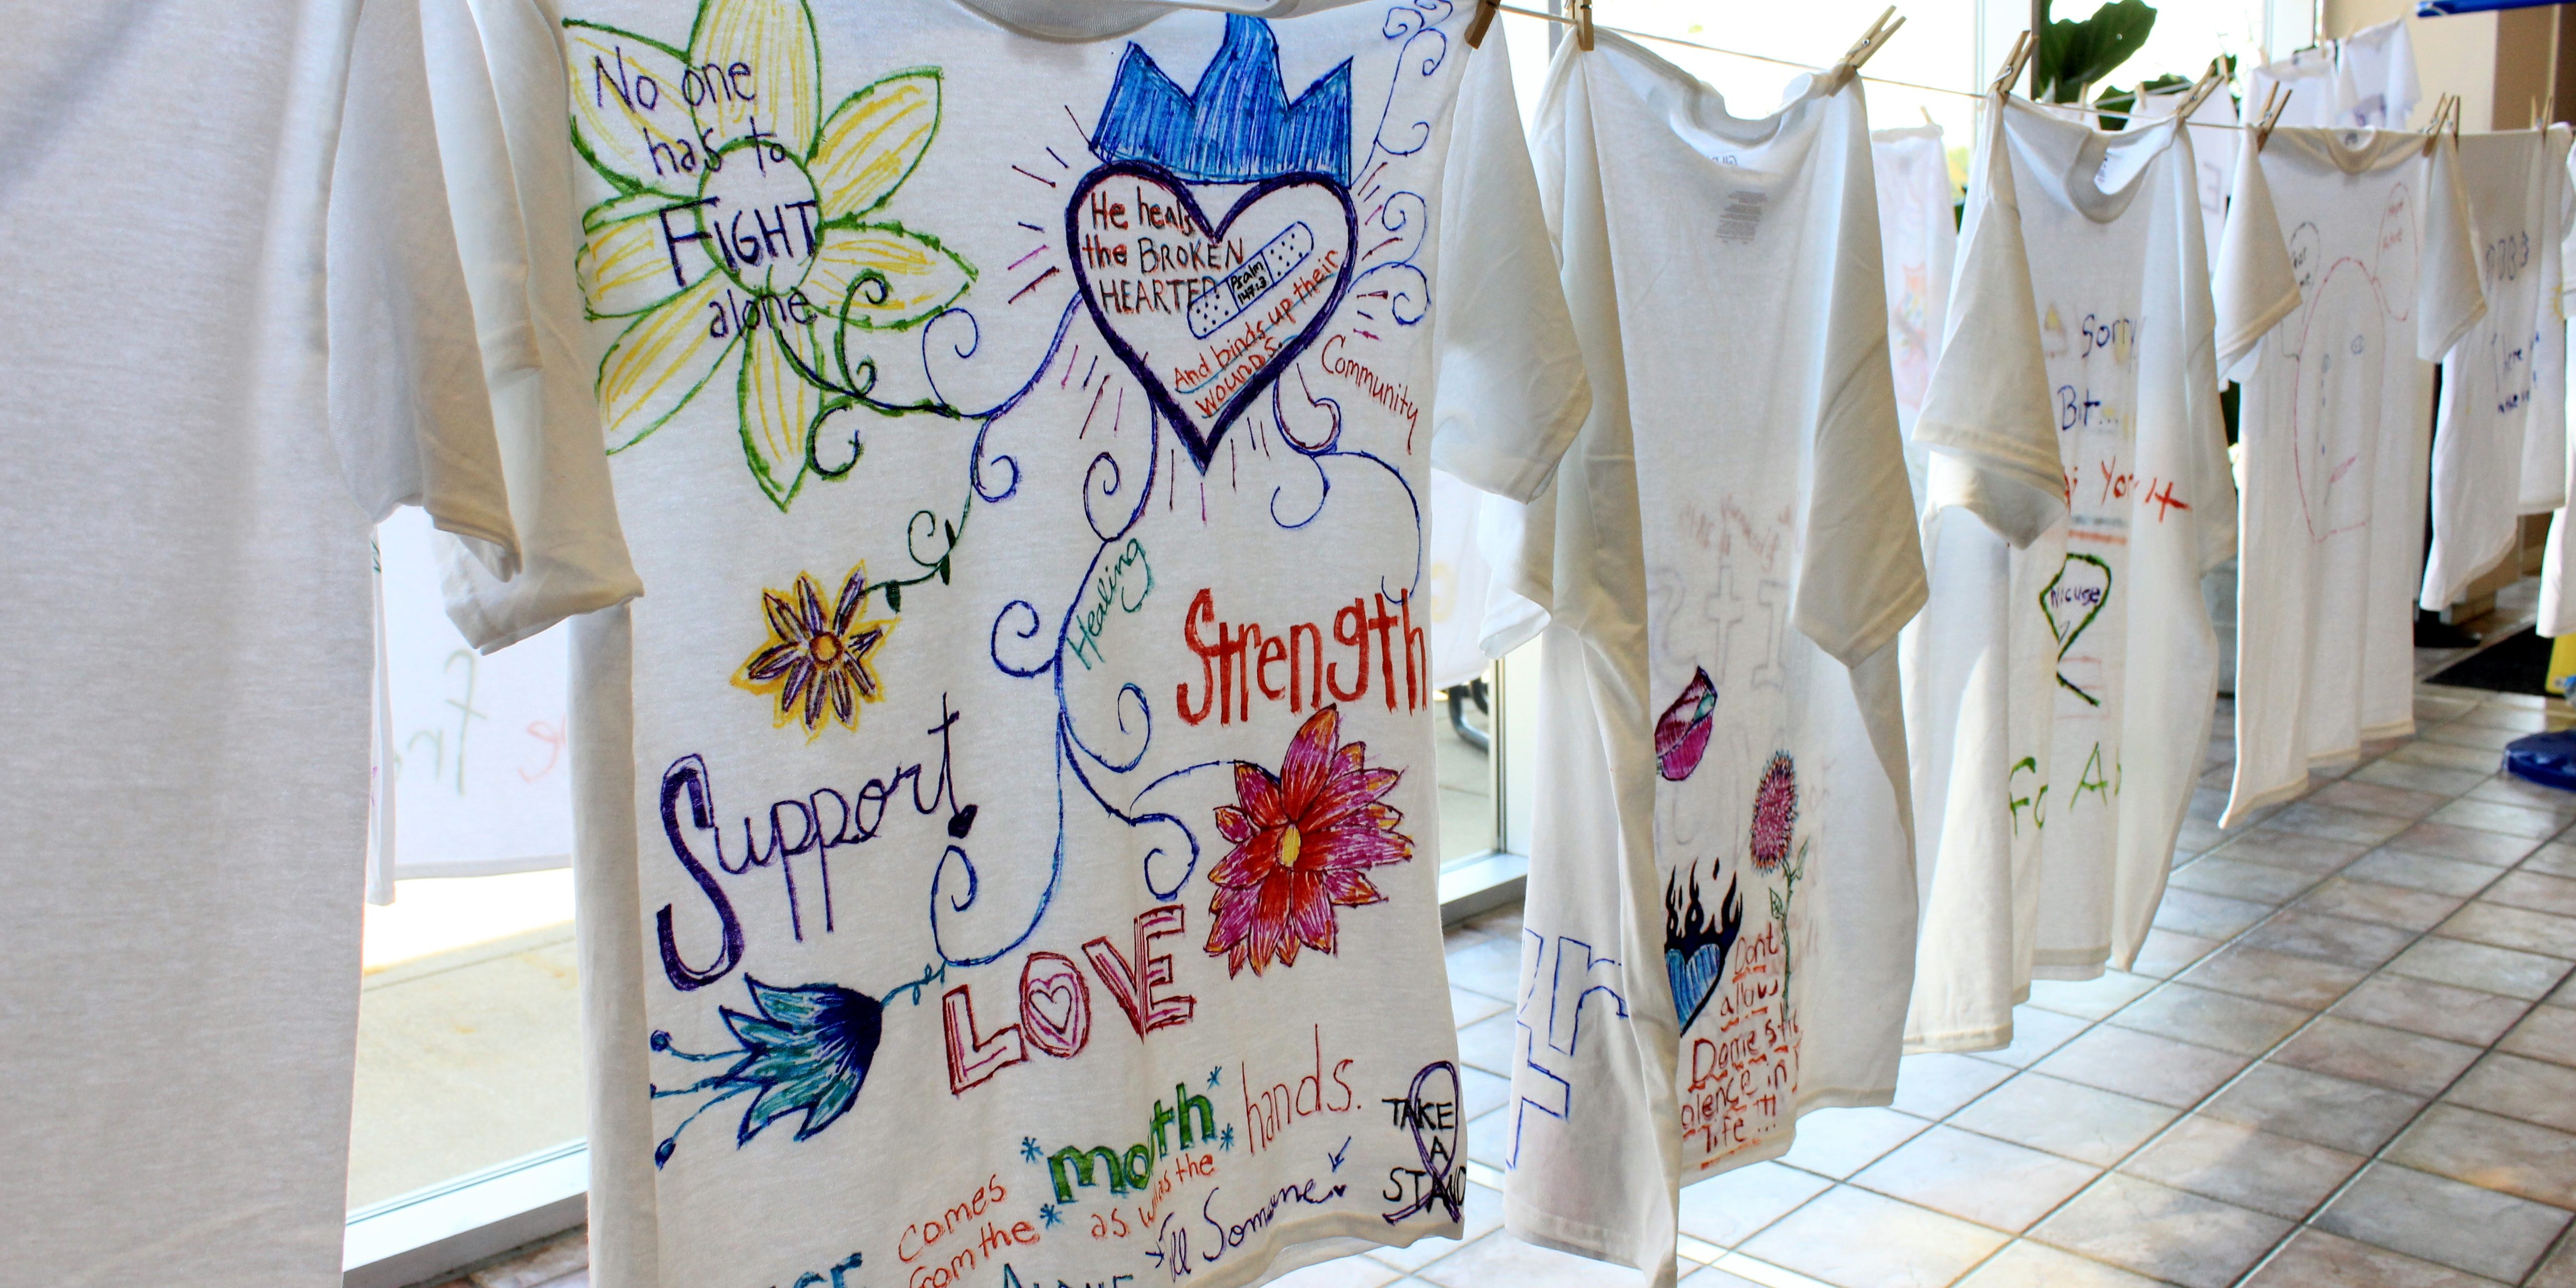 The Clothesline Project: End the Silence